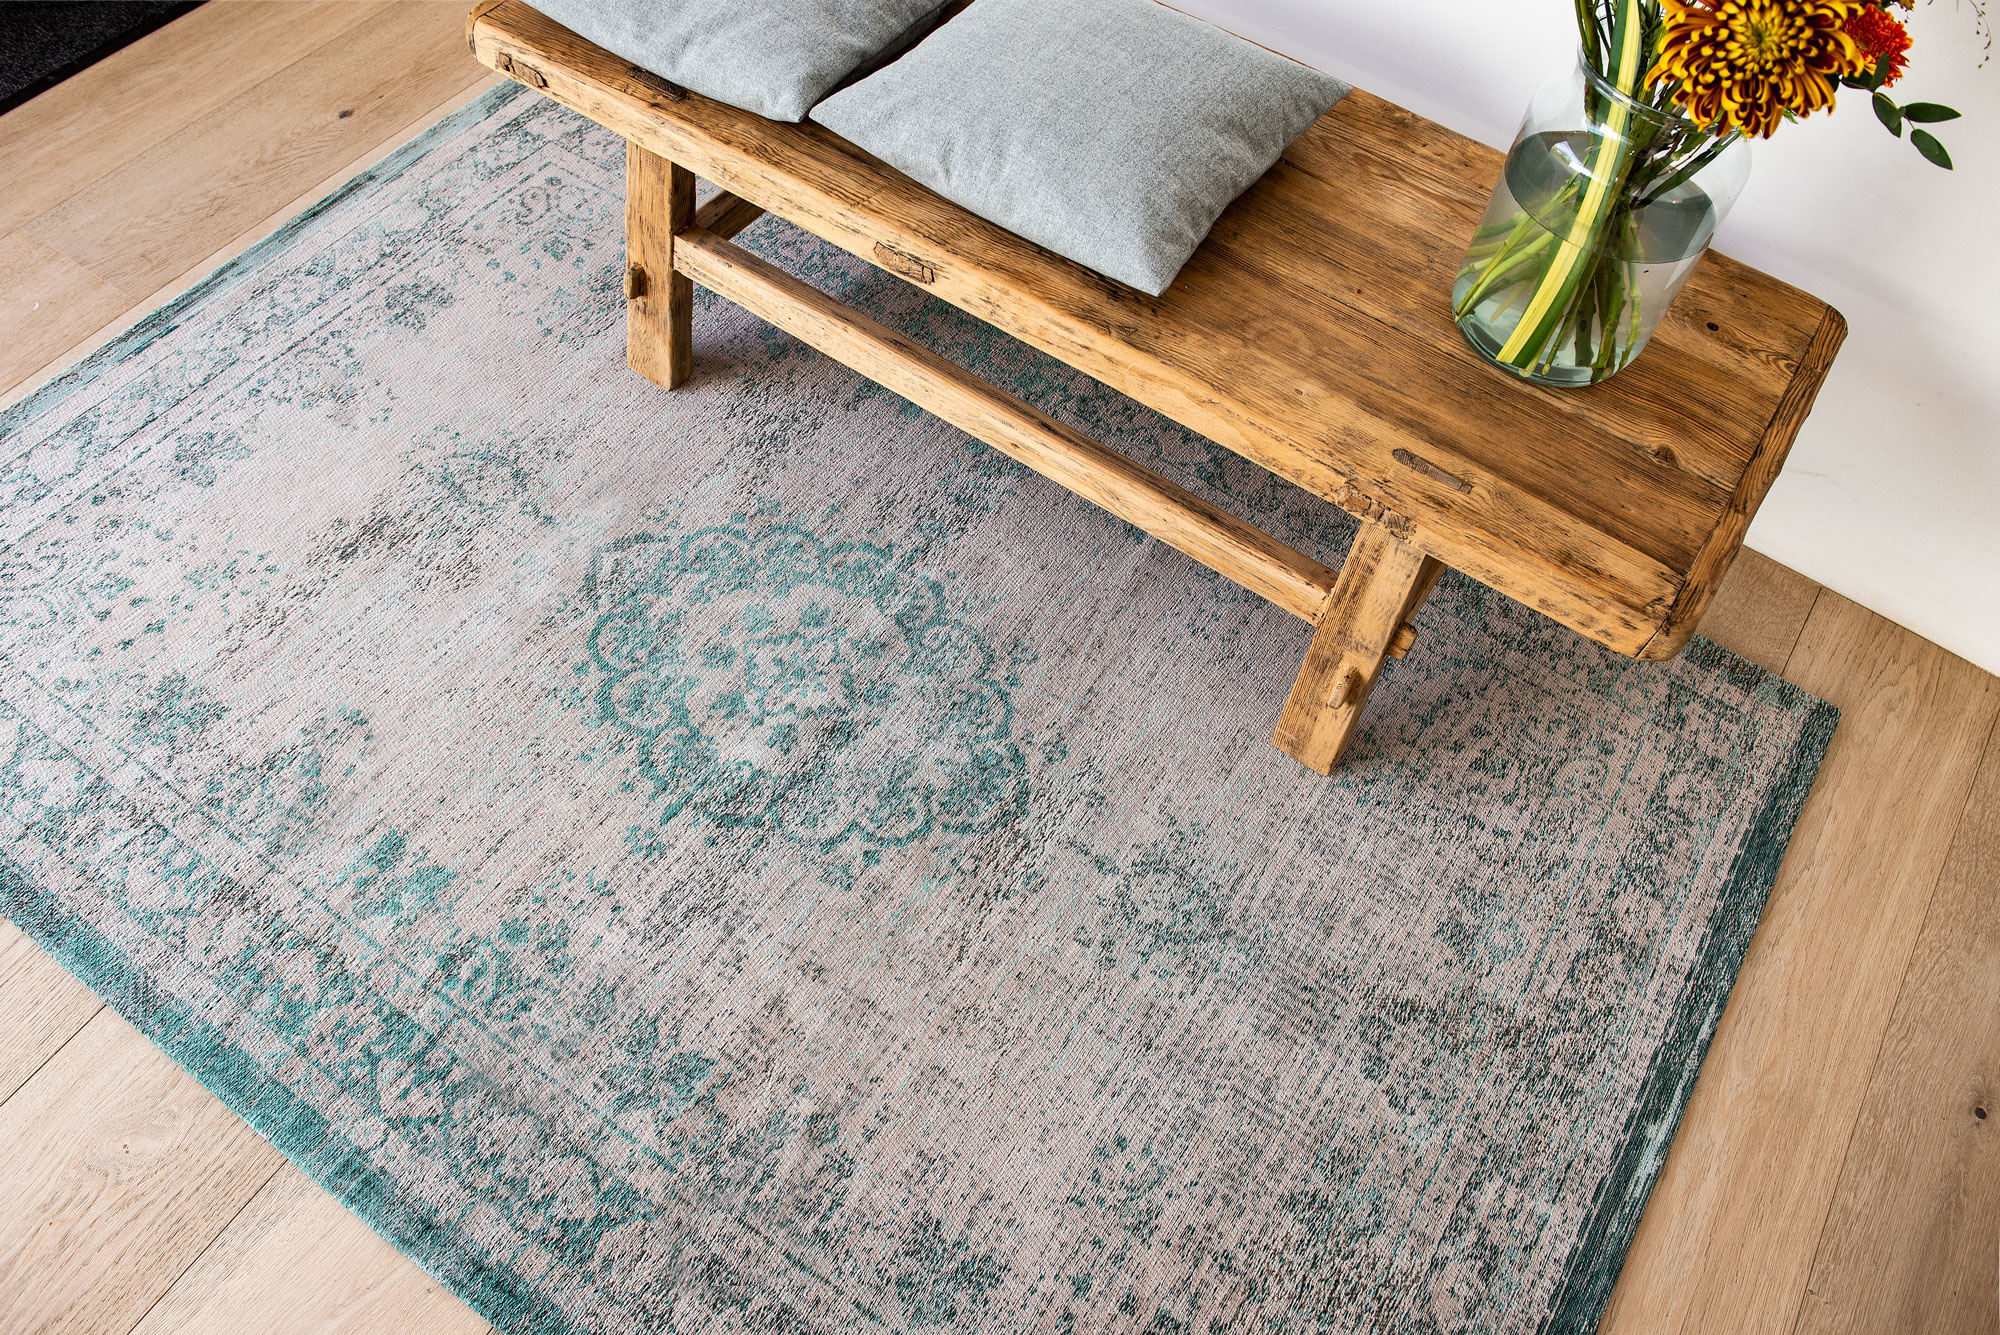 Medallion Turquoise Flatwoven Rug ☞ Size: 8' x 11' 2" (240 x 340 cm)